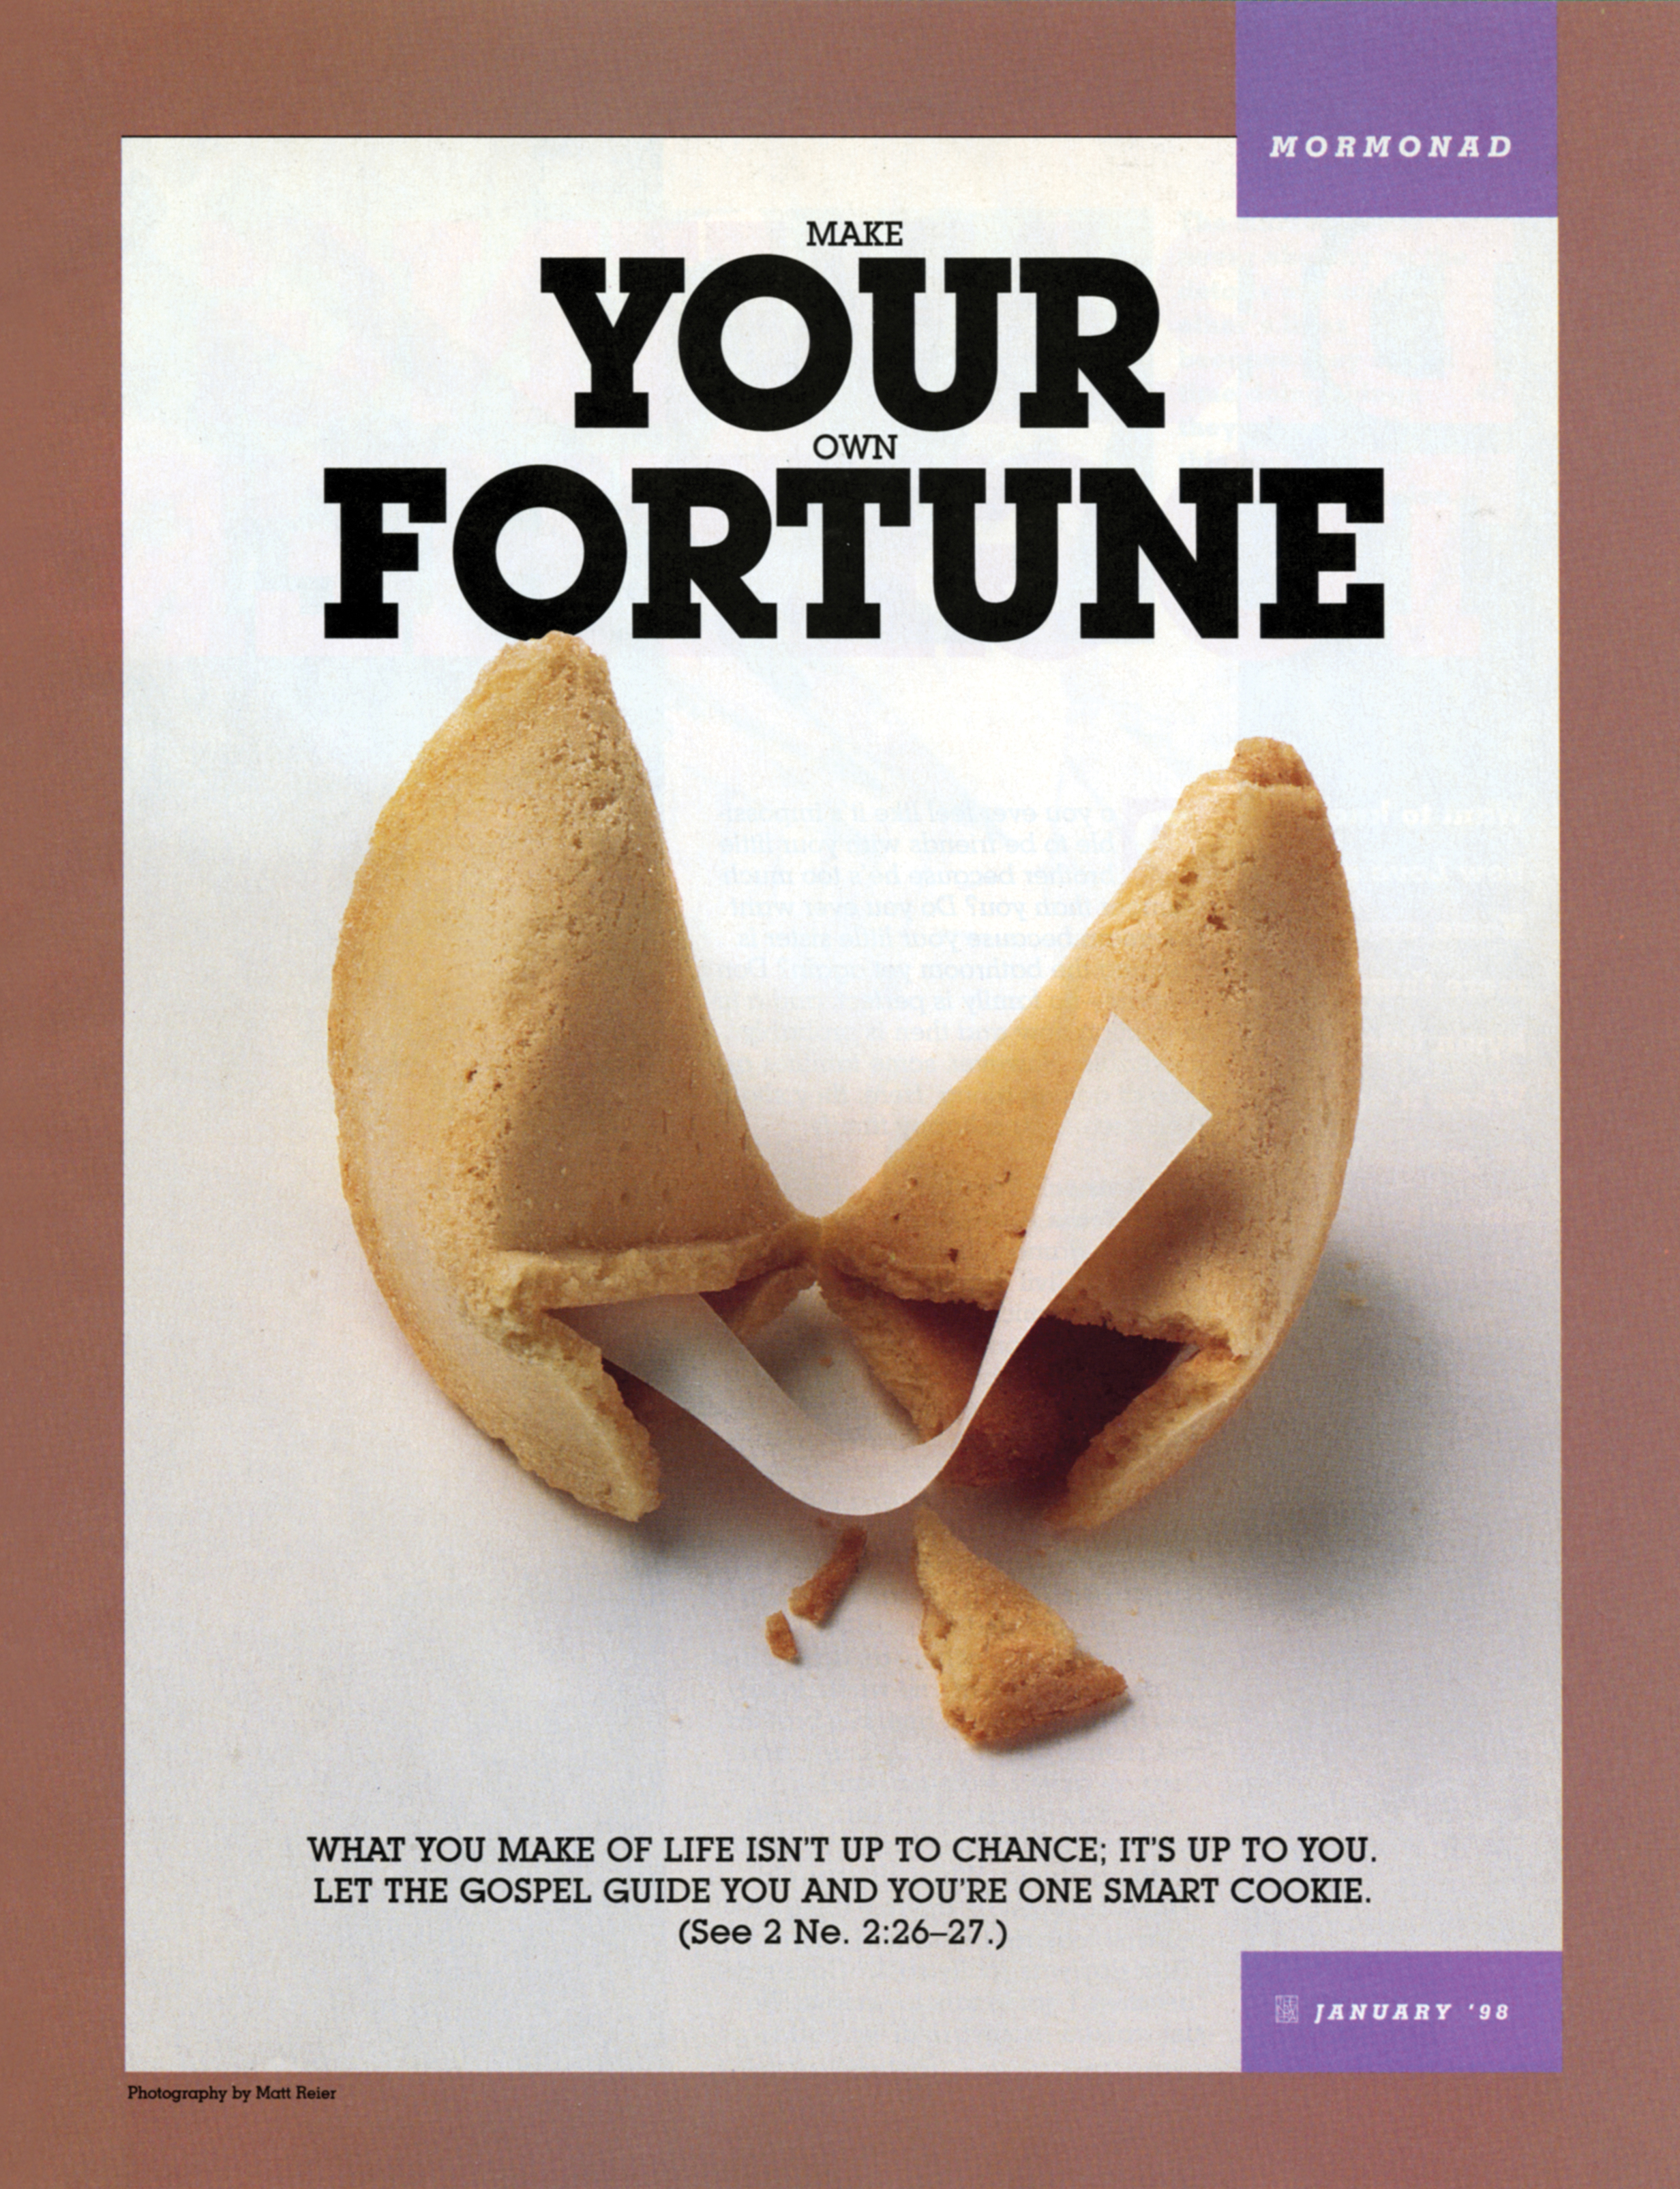 A conceptual image of a broken fortune cookie with a blank slip of paper inside of it, paired with the words “Make Your Own Fortune.”